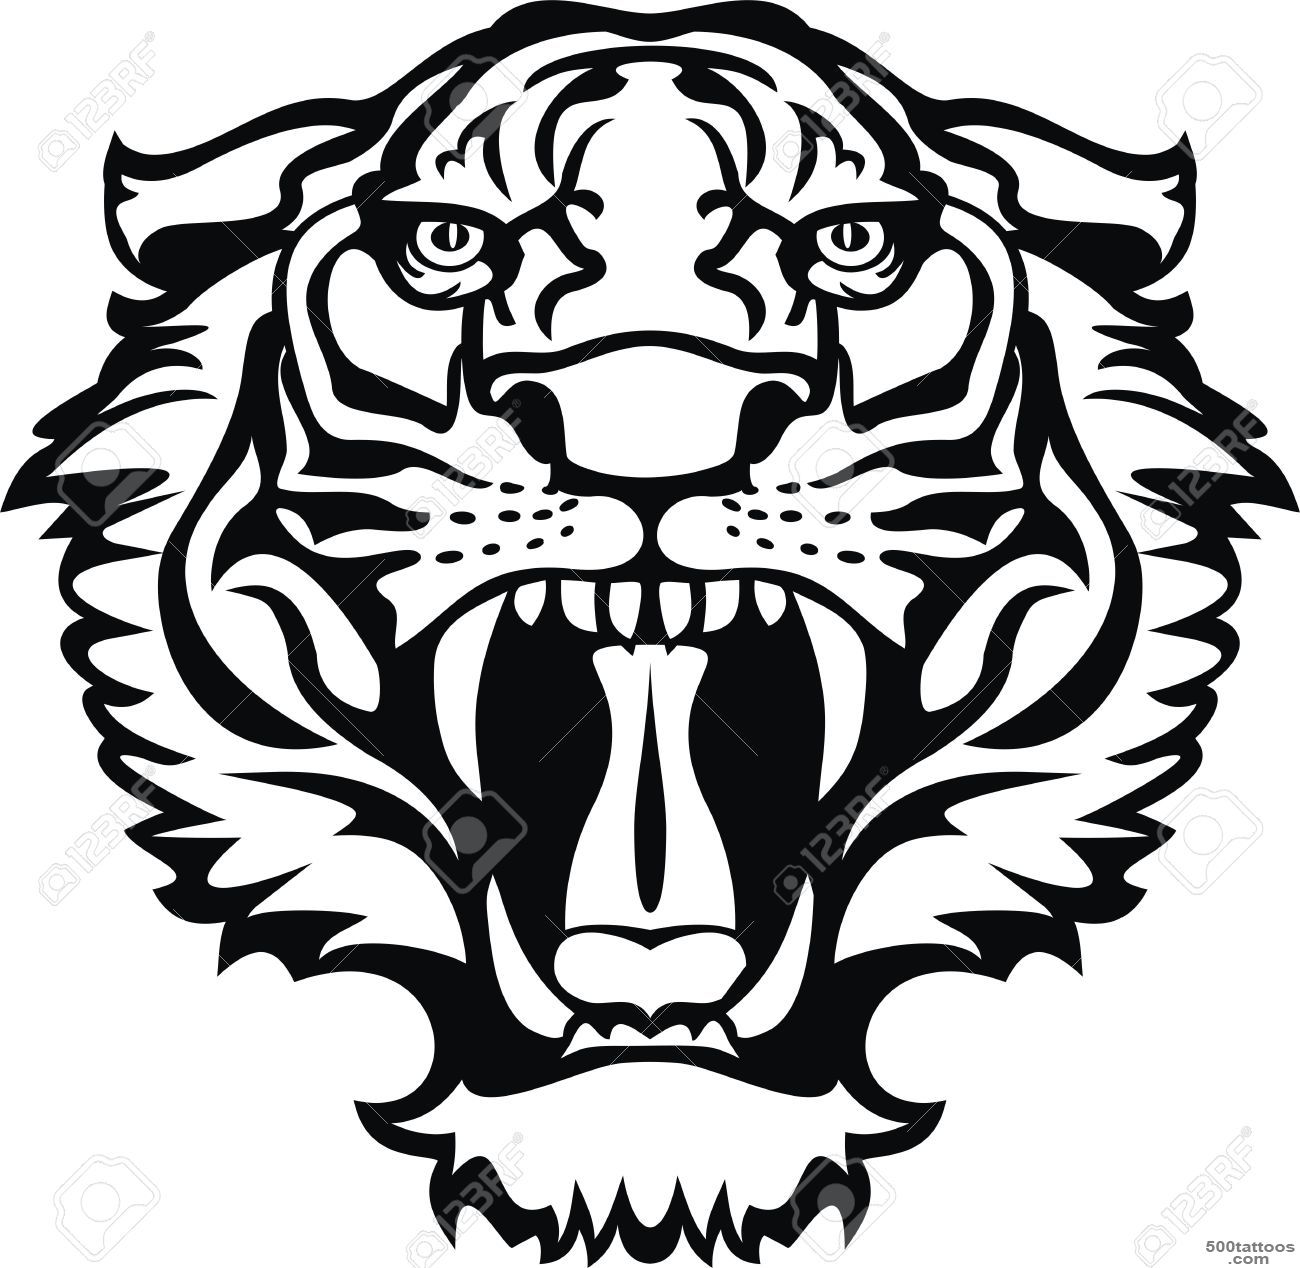 Tiger Tattoo Stock Photo, Picture And Royalty Free Image. Image ..._39